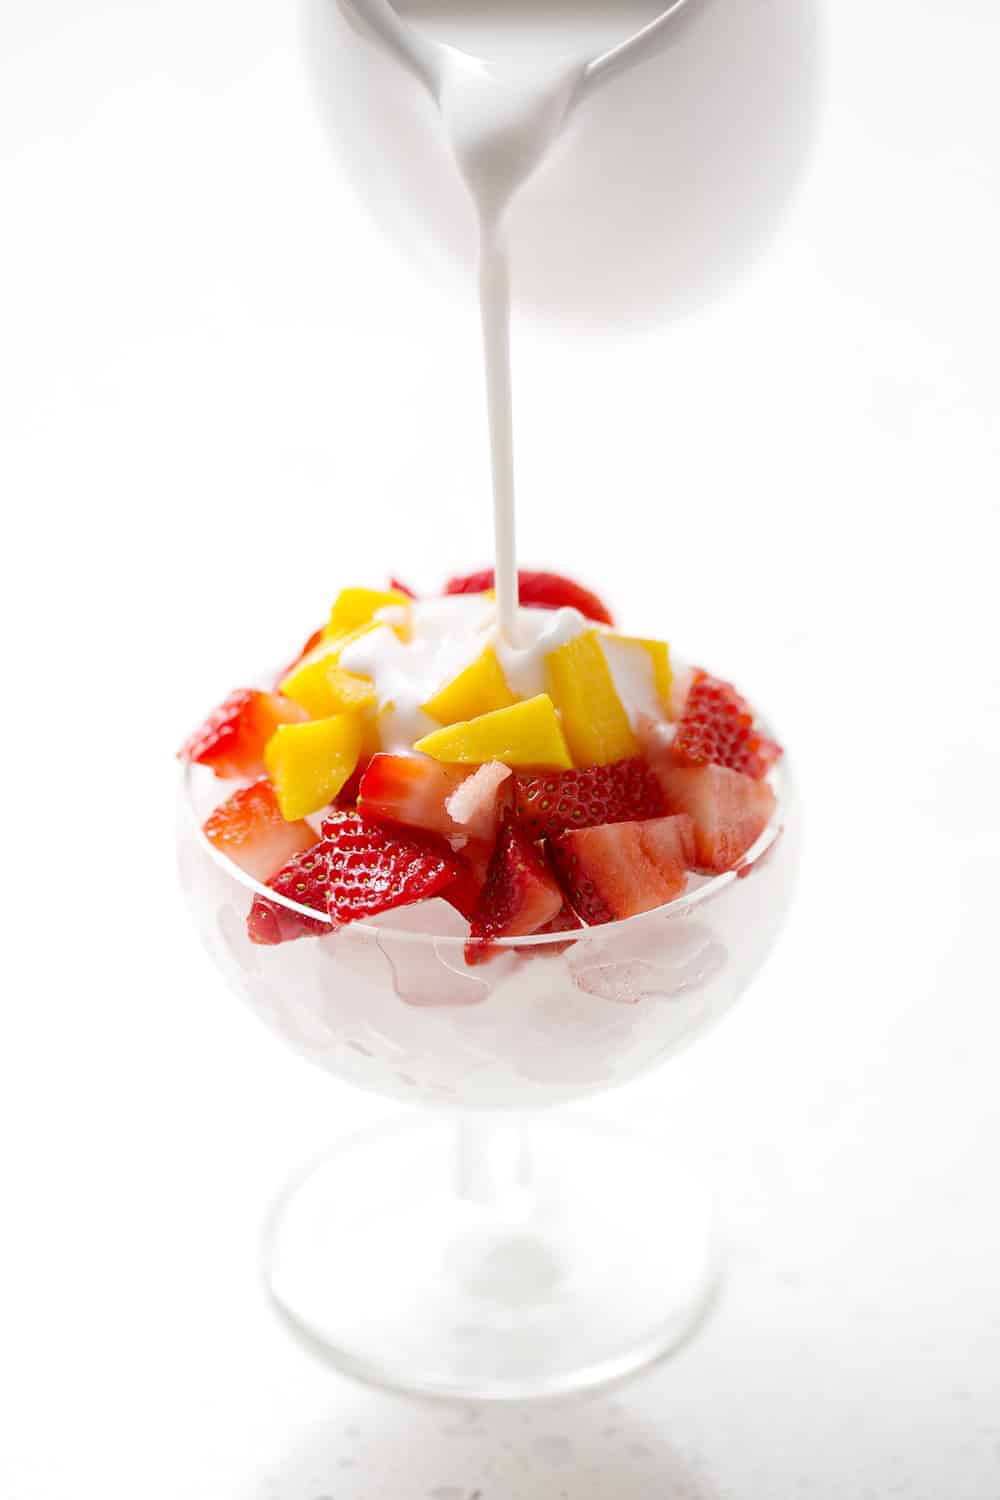 Have you ever heard of Bao Bing? It’s a Chinese dessert made from shaved ice and topped with your favorite combination of fruit, jellies and sauces. The closest American dish would be the ice cream Sunday. I’ve created this recipe to be totally AIP friendly and as always, delicious.